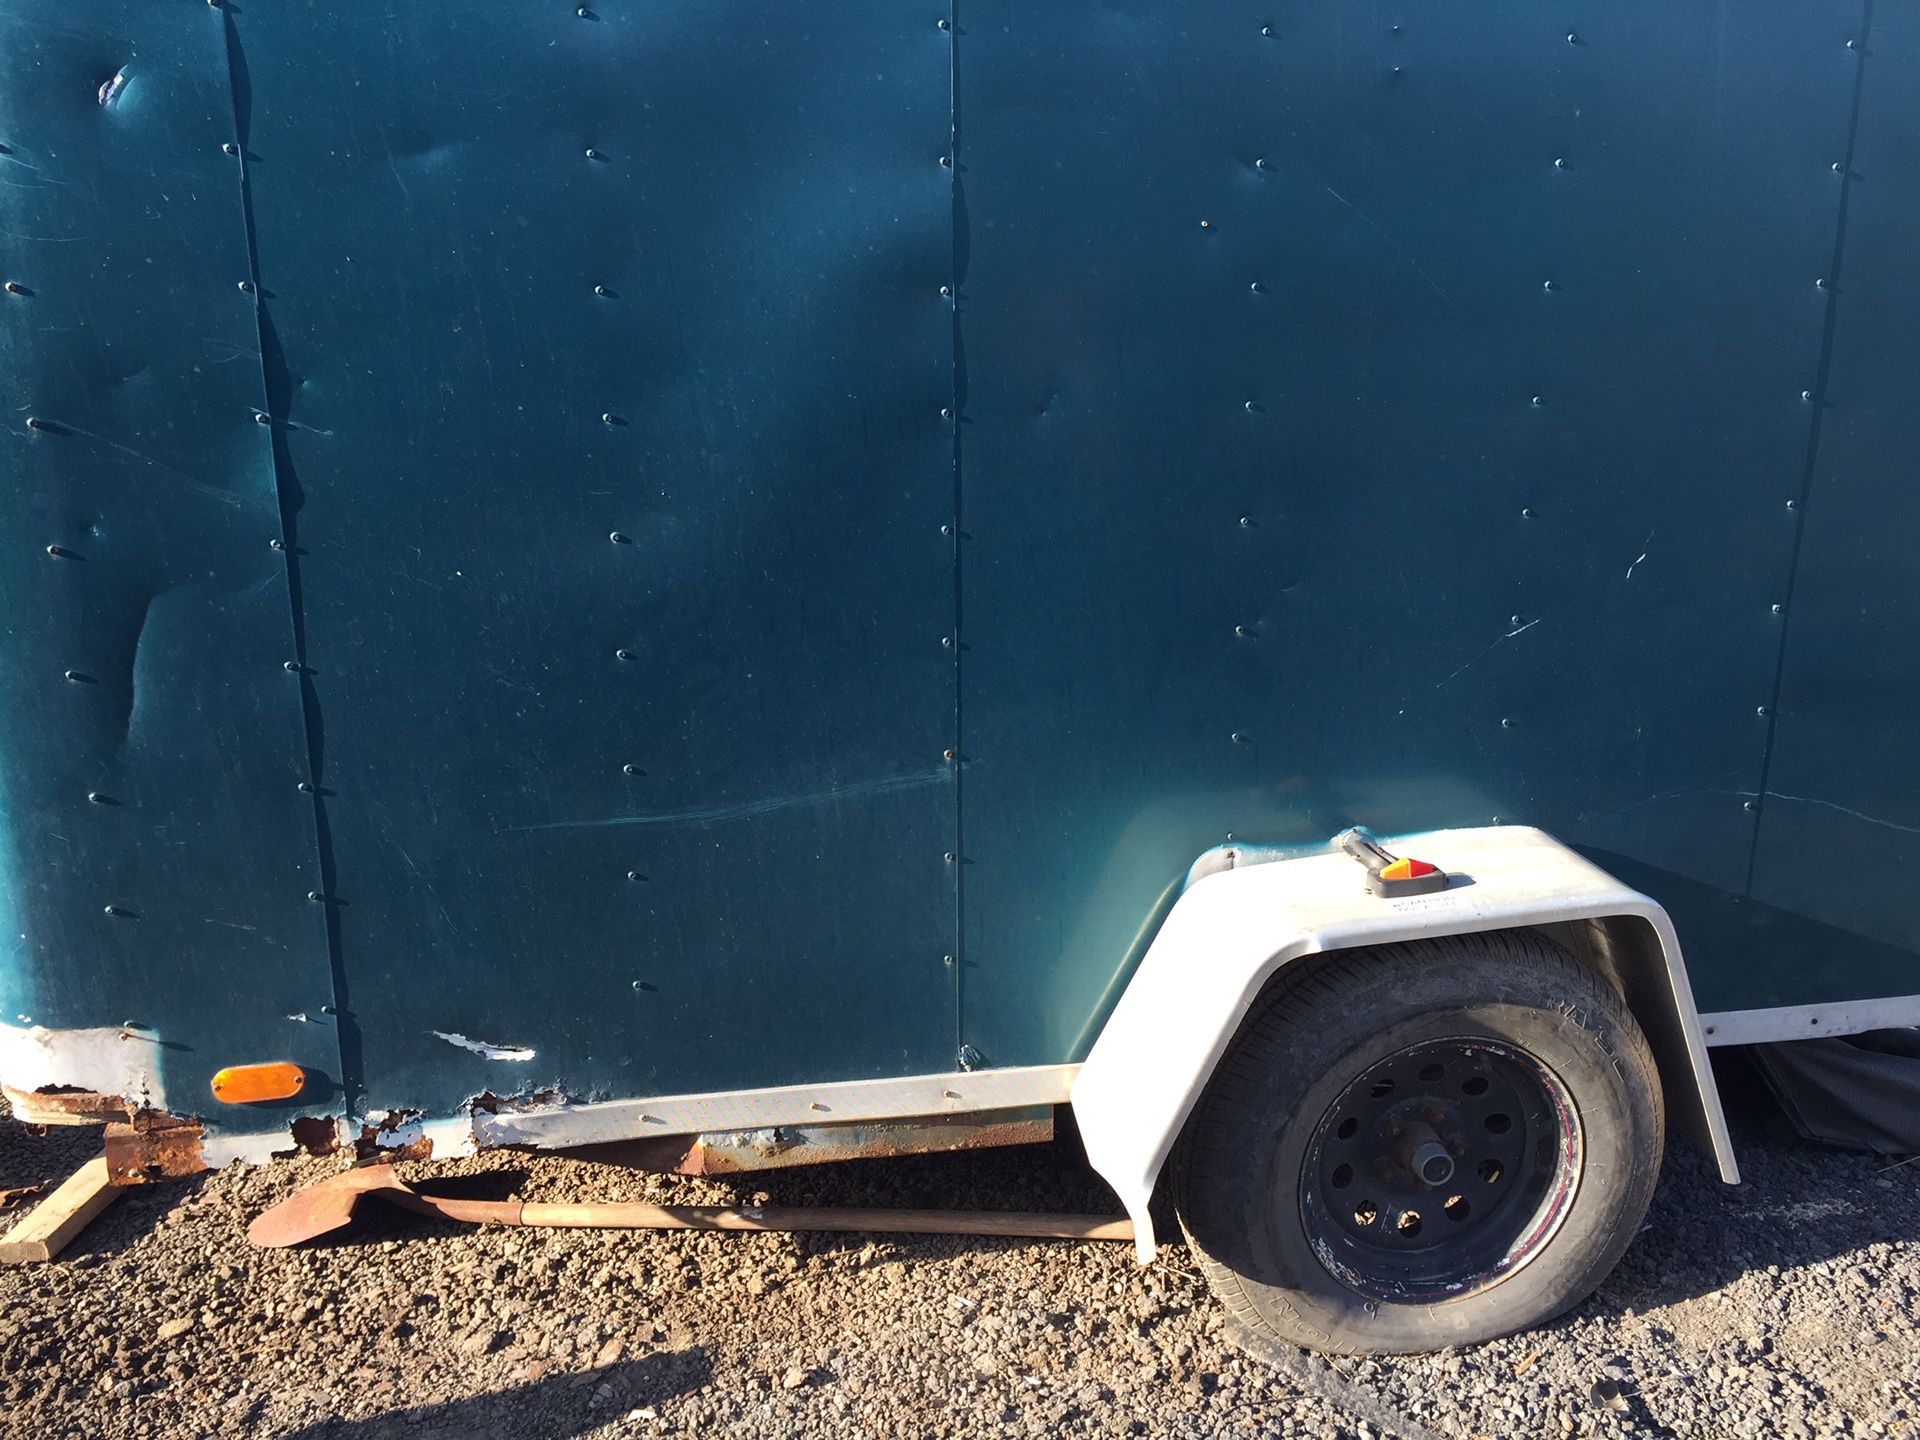 Cargo trailer for sale in good shape for only $900